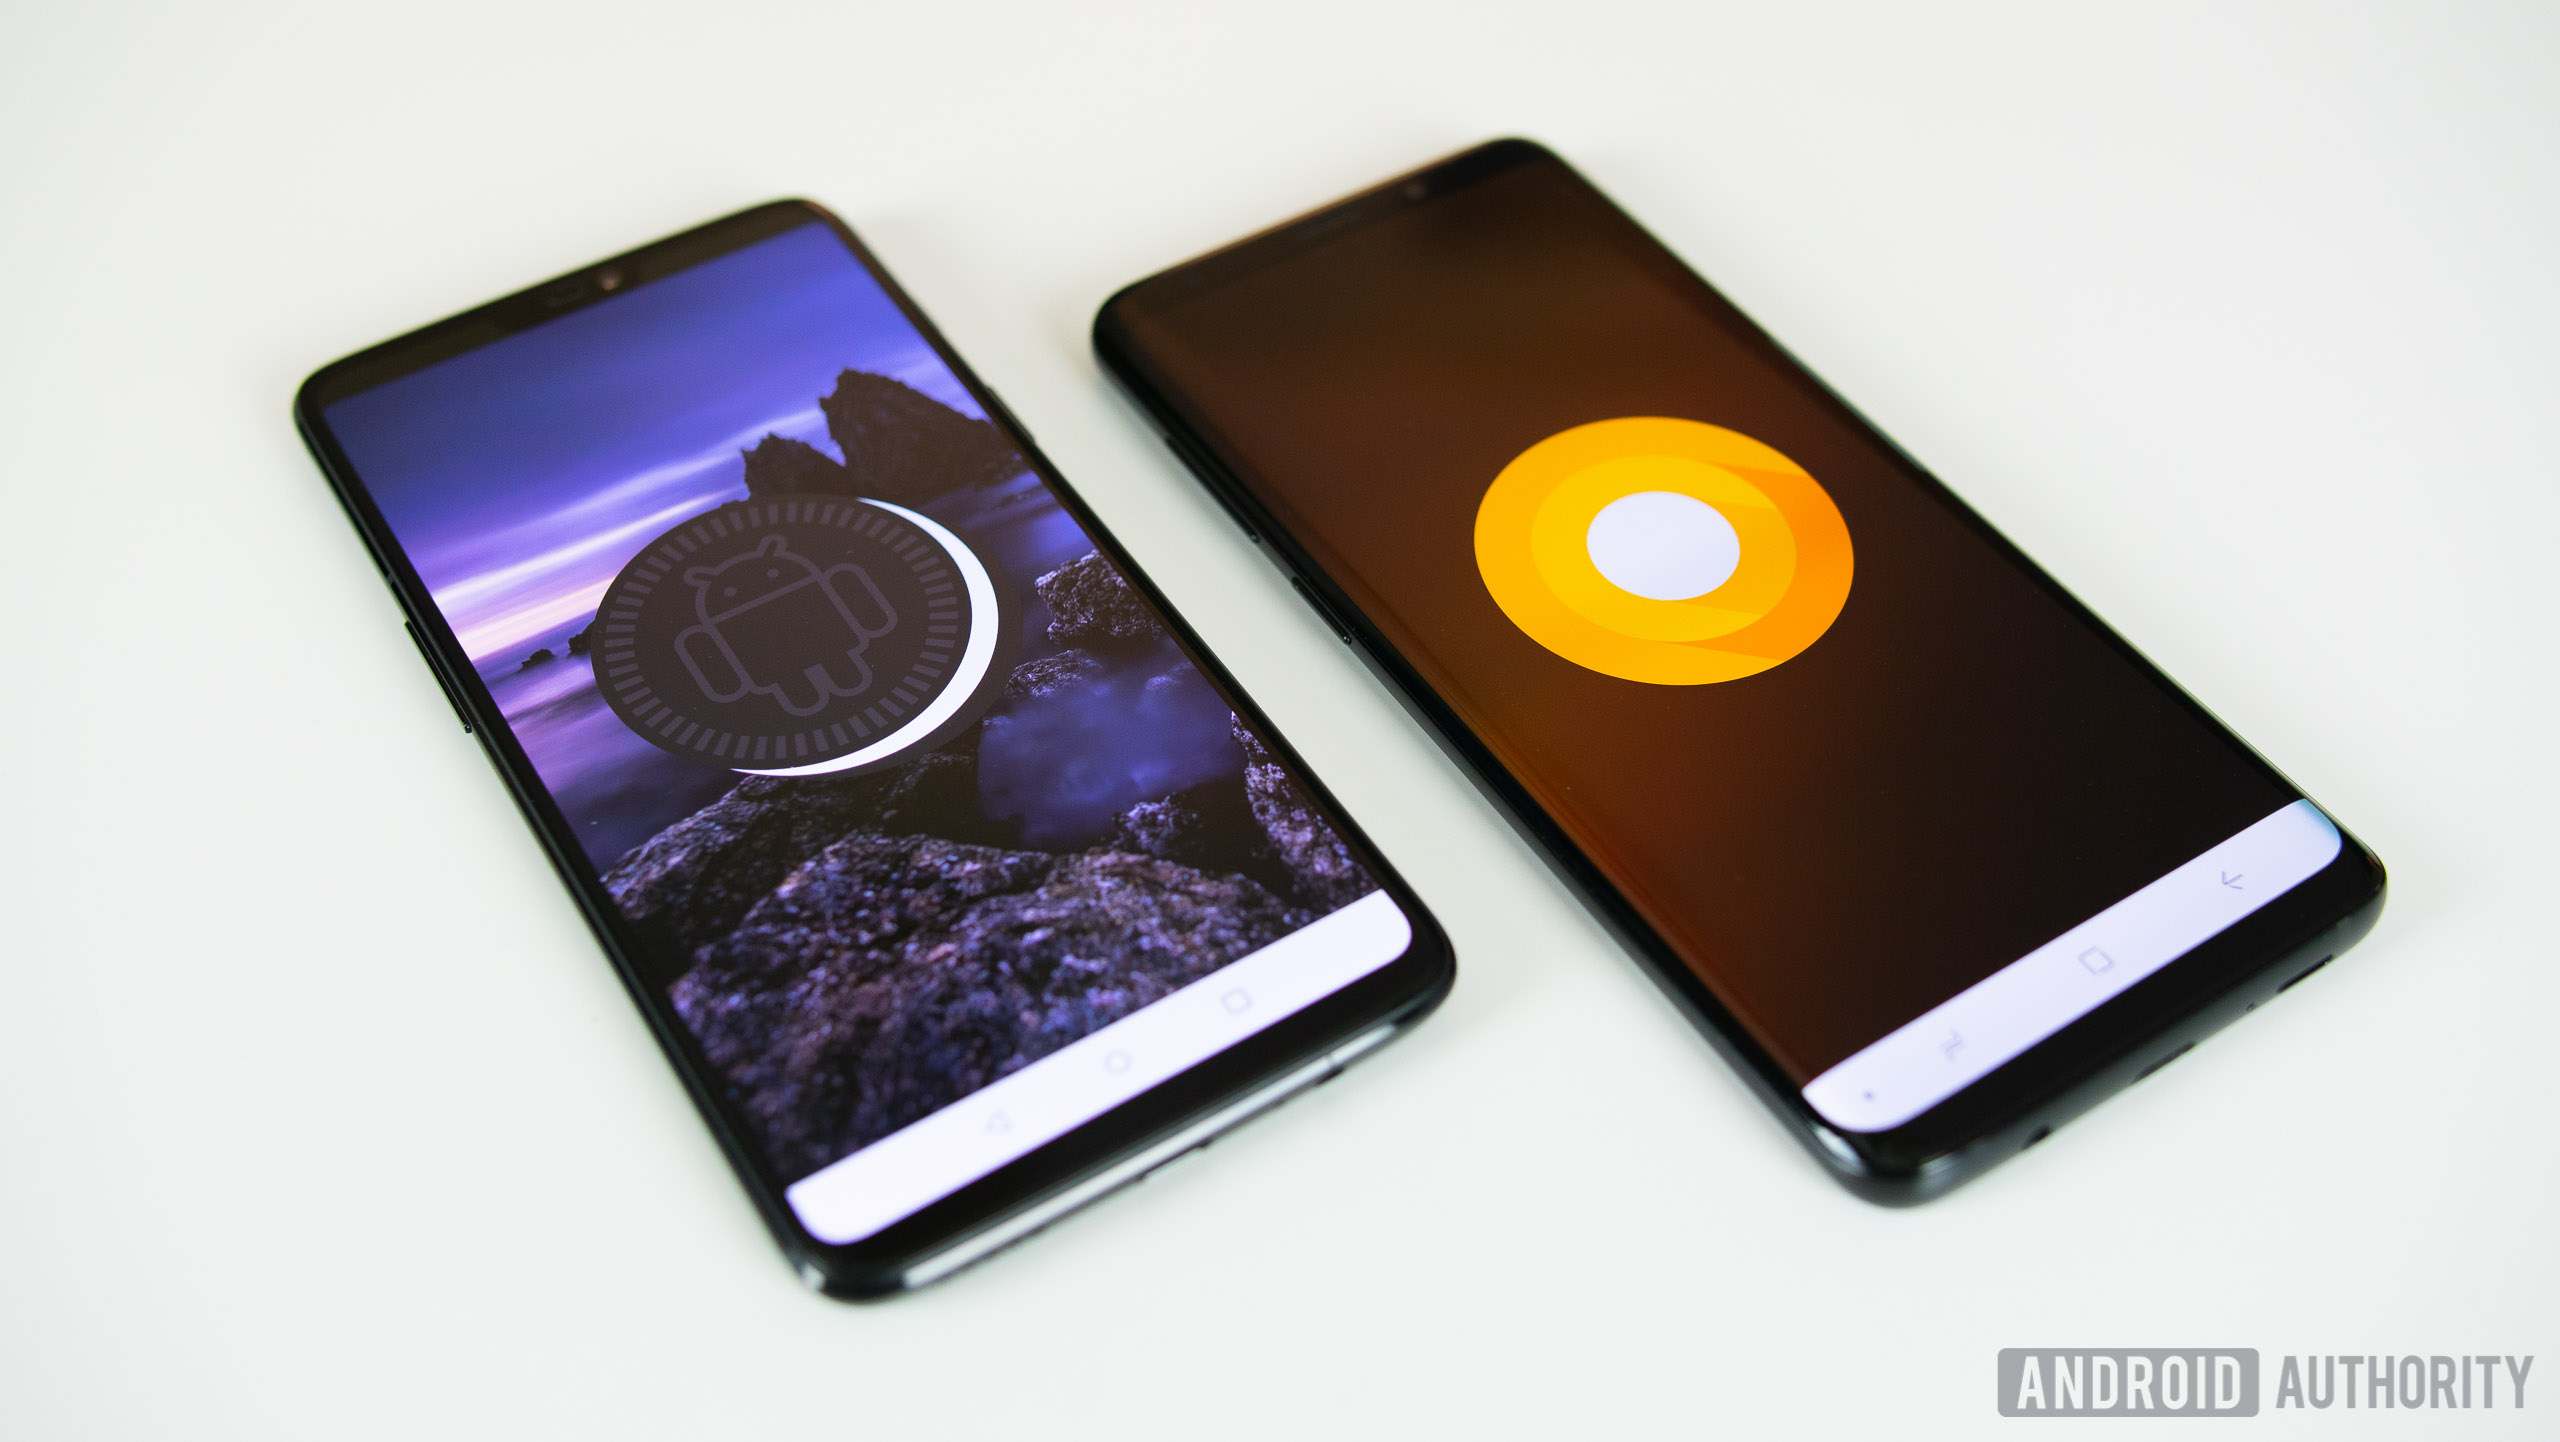 Galaxy S9 Plus software version is different from OnePlus 6